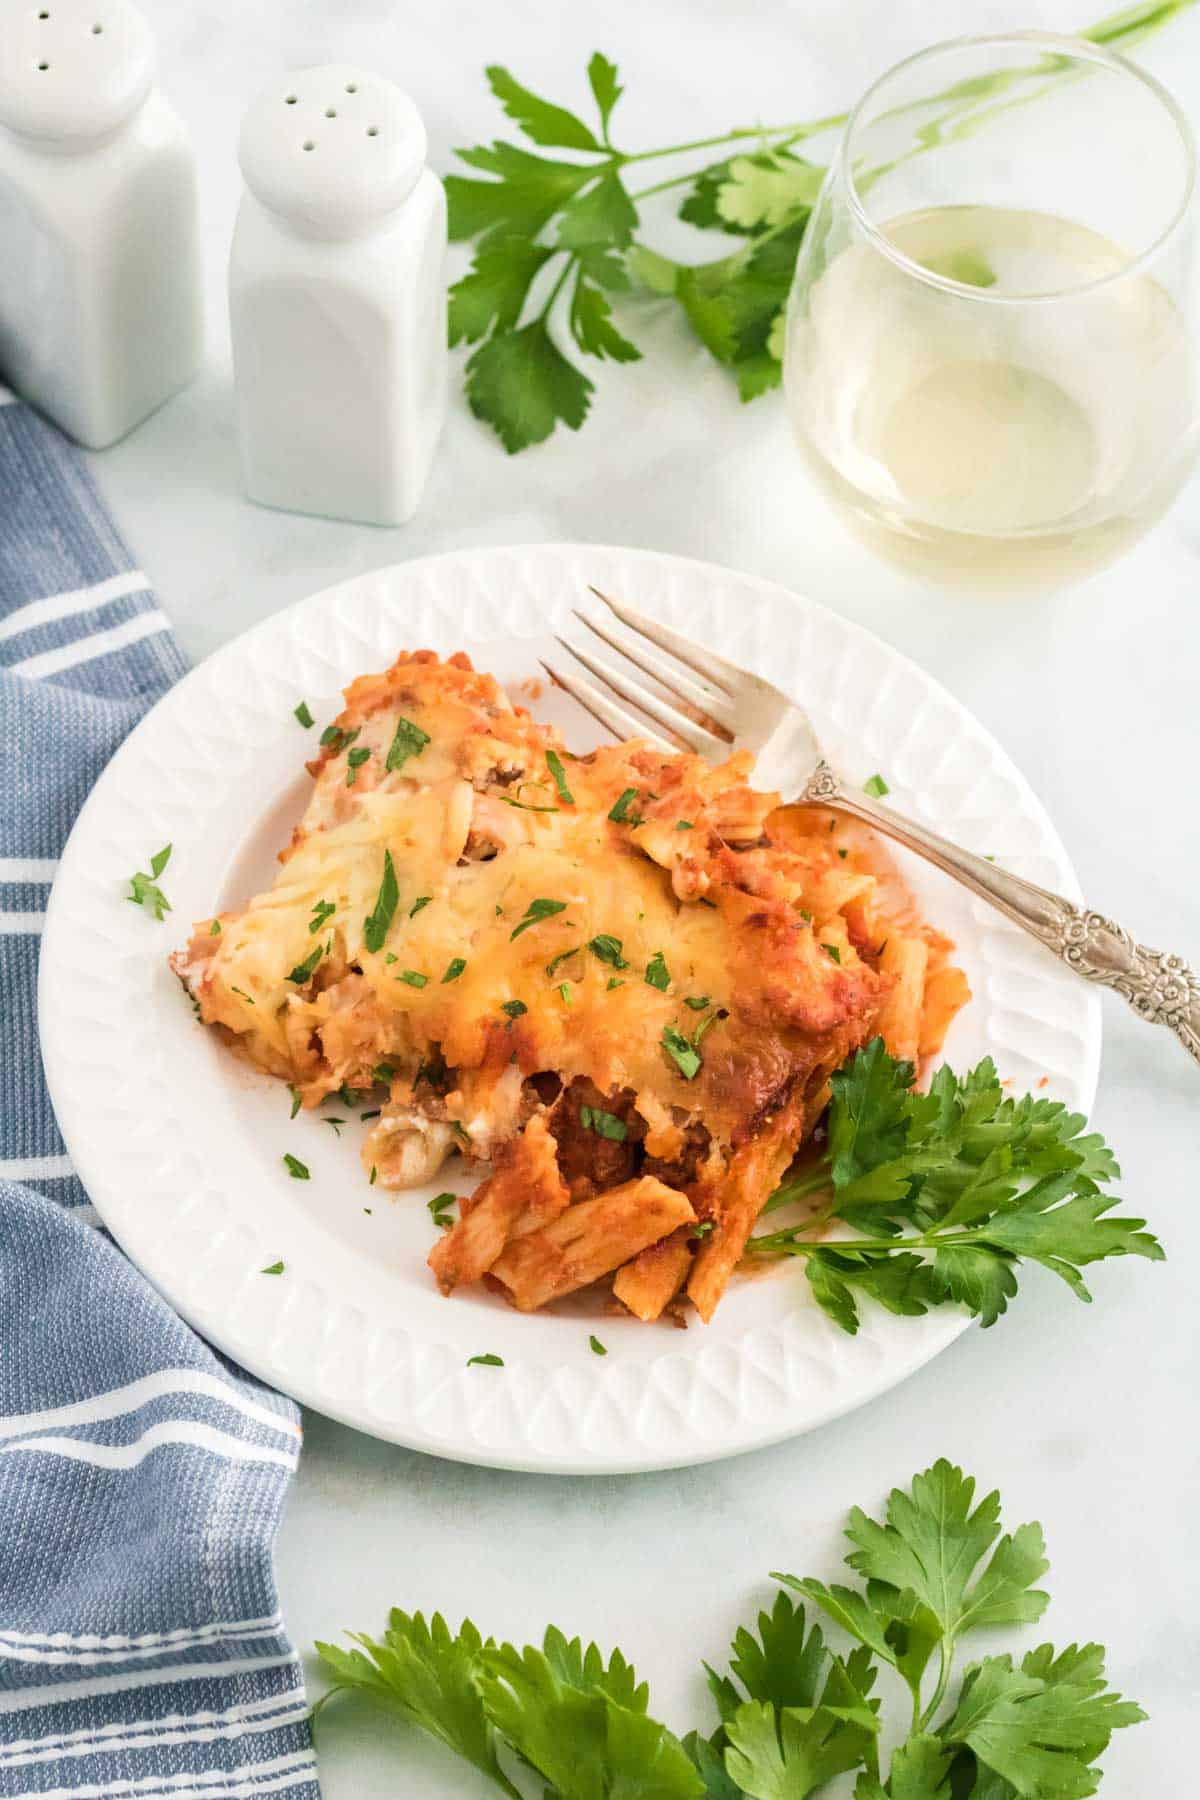 A serving of baked ziti on a plate garnished with fresh herbs.